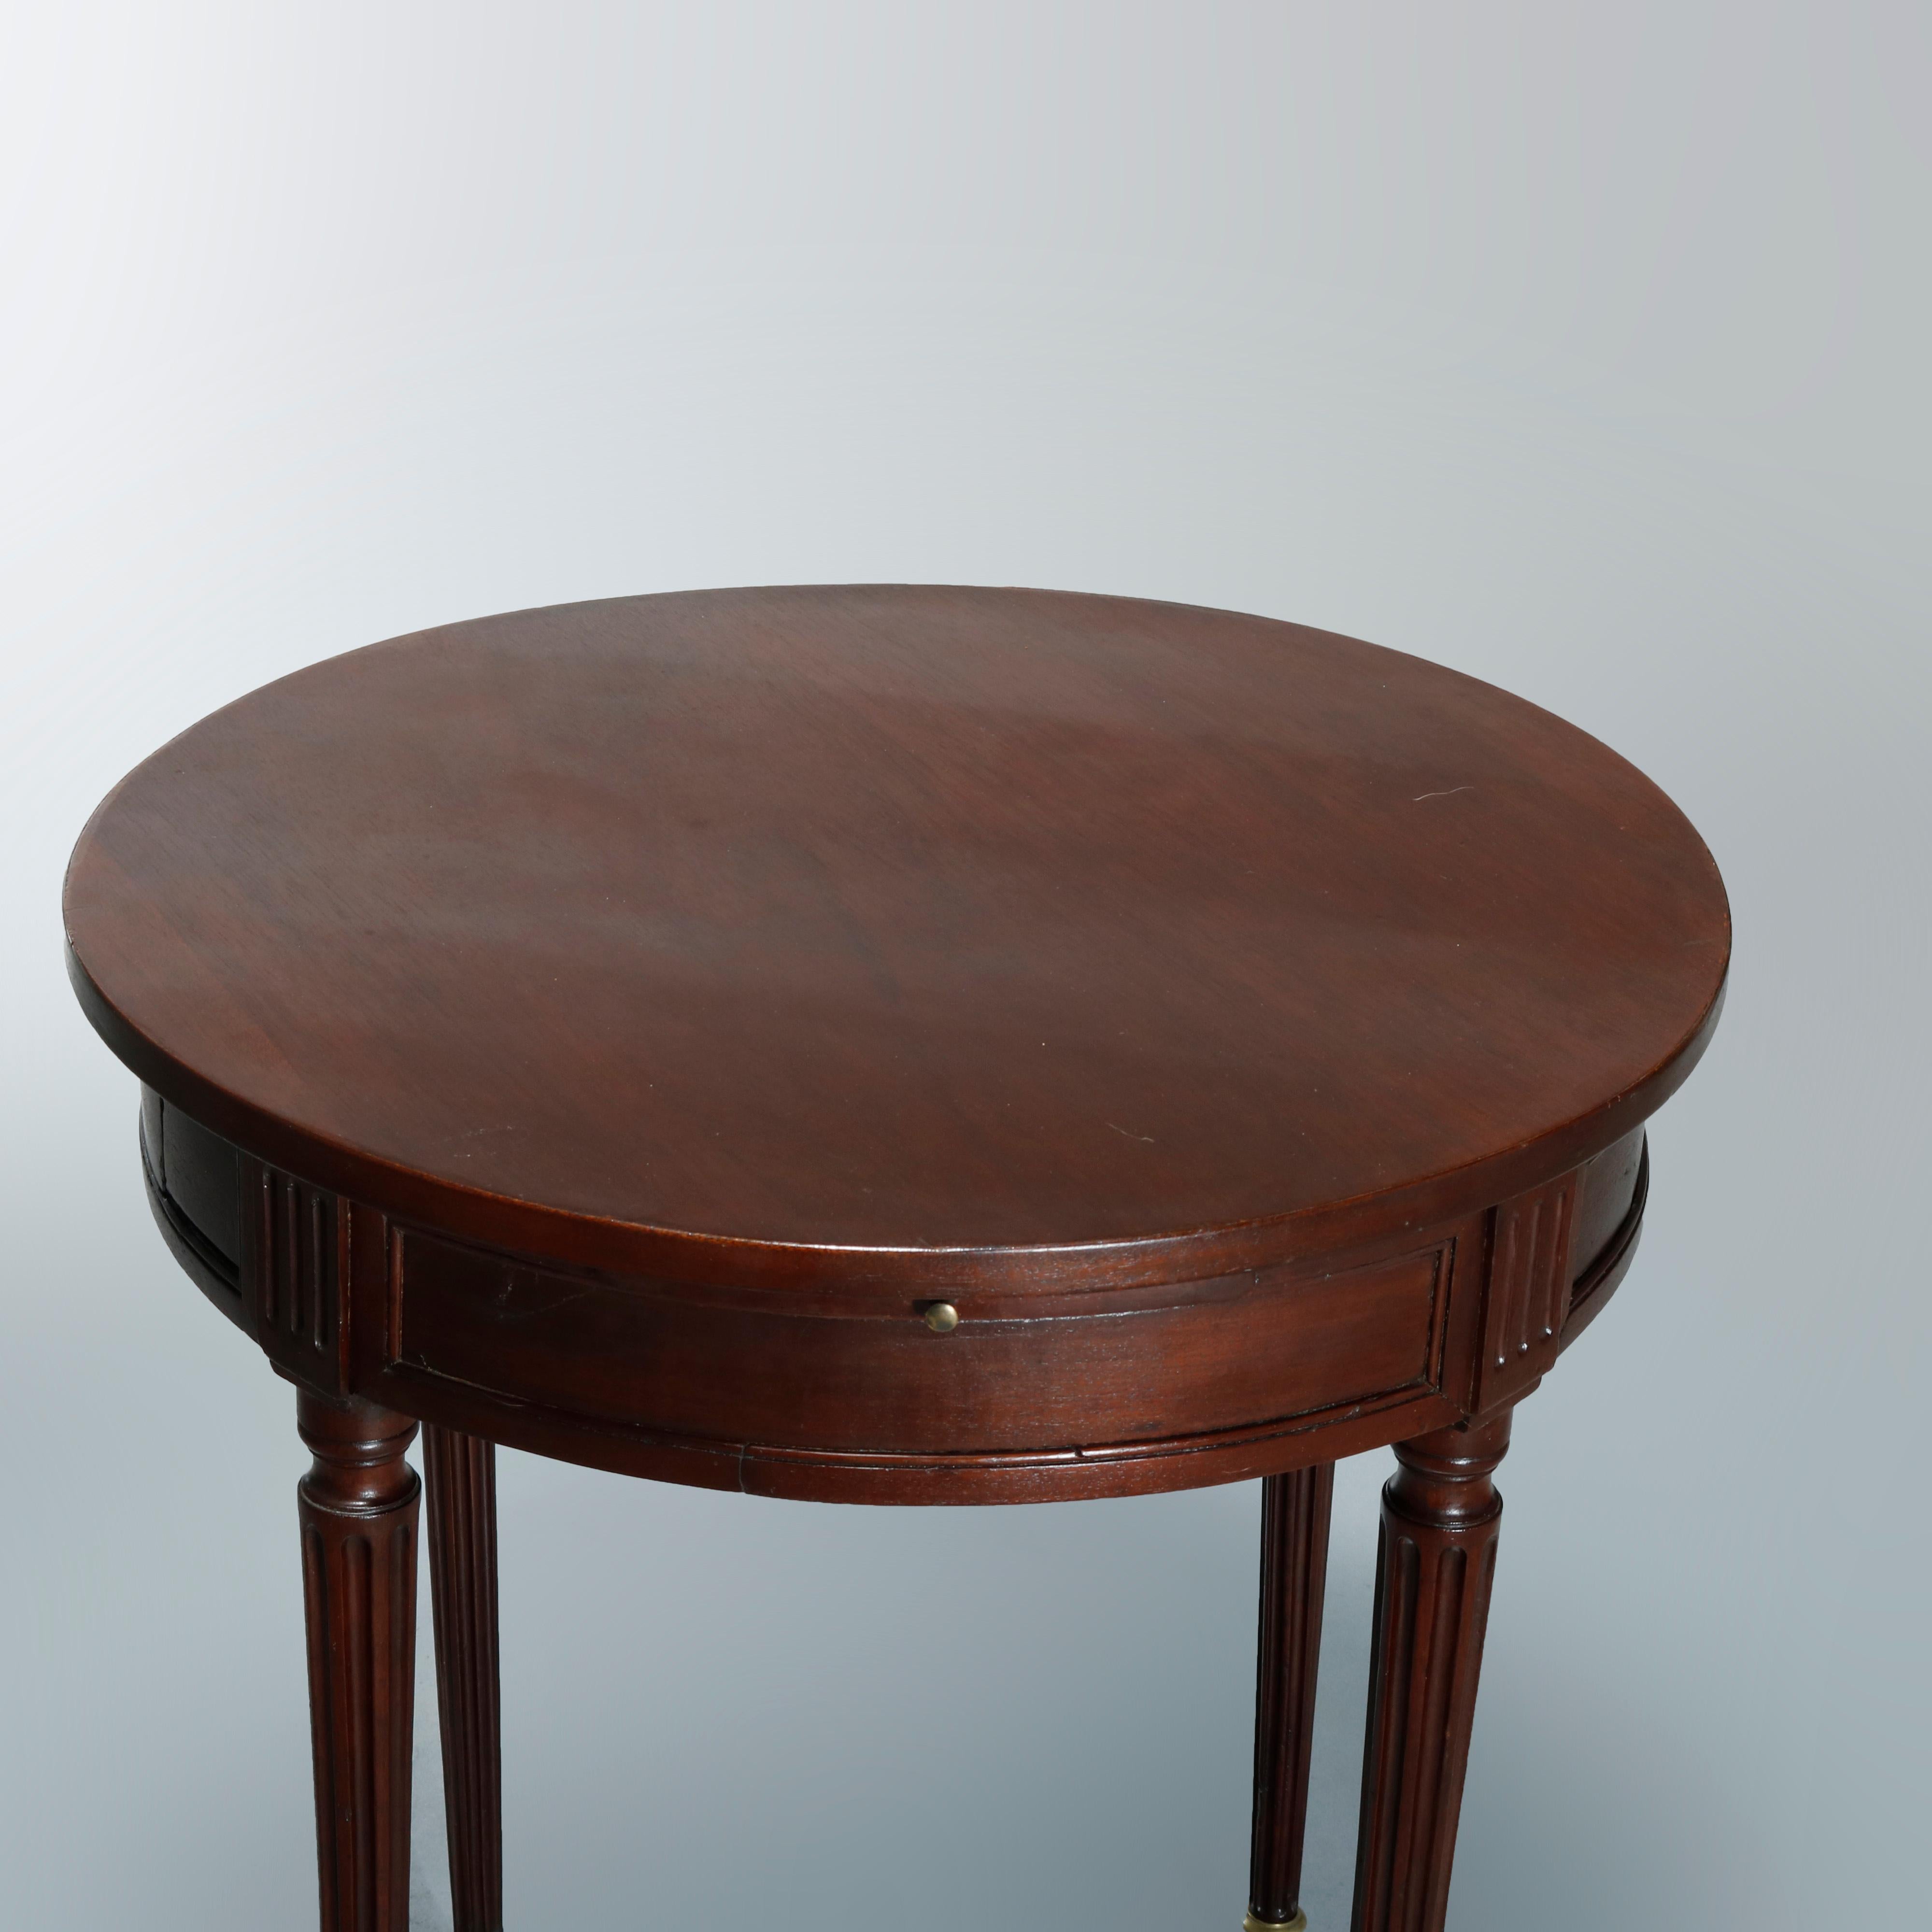 An antique English Sheraton game or side table offers mahogany construction in round form and having single drawer, raised on tapered and reeded legs terminating in casters, c1830

Measures: 28.75